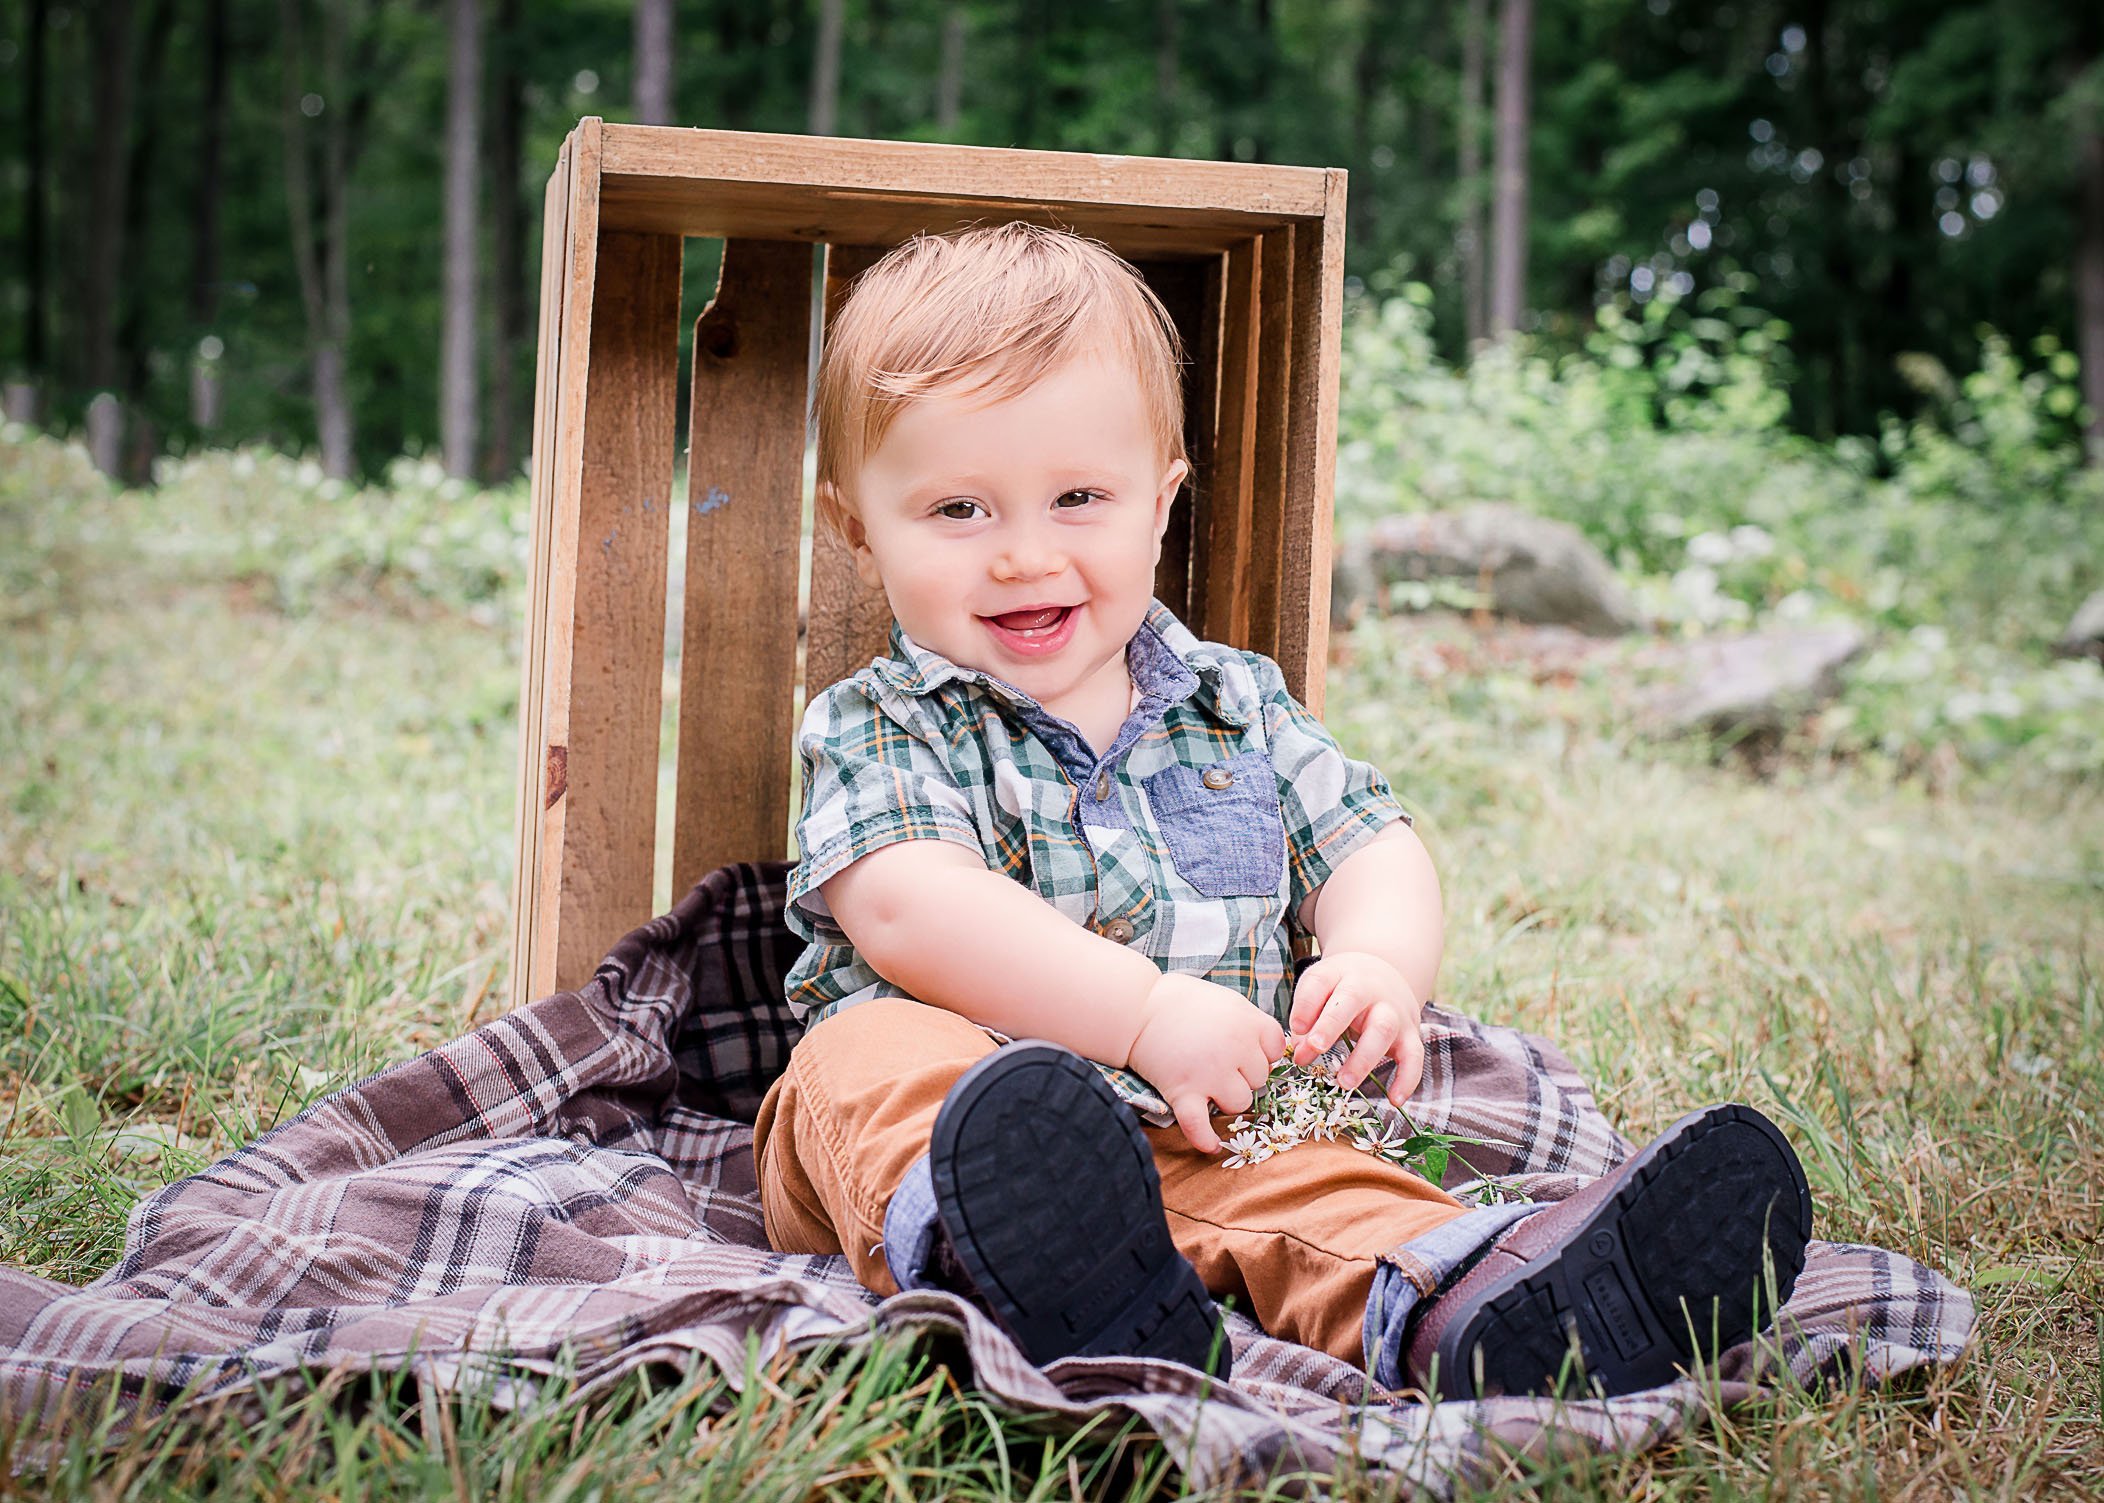 9 mo old baby boy sitting outside next to a wooden crate playing with flowers One Big Happy Photo